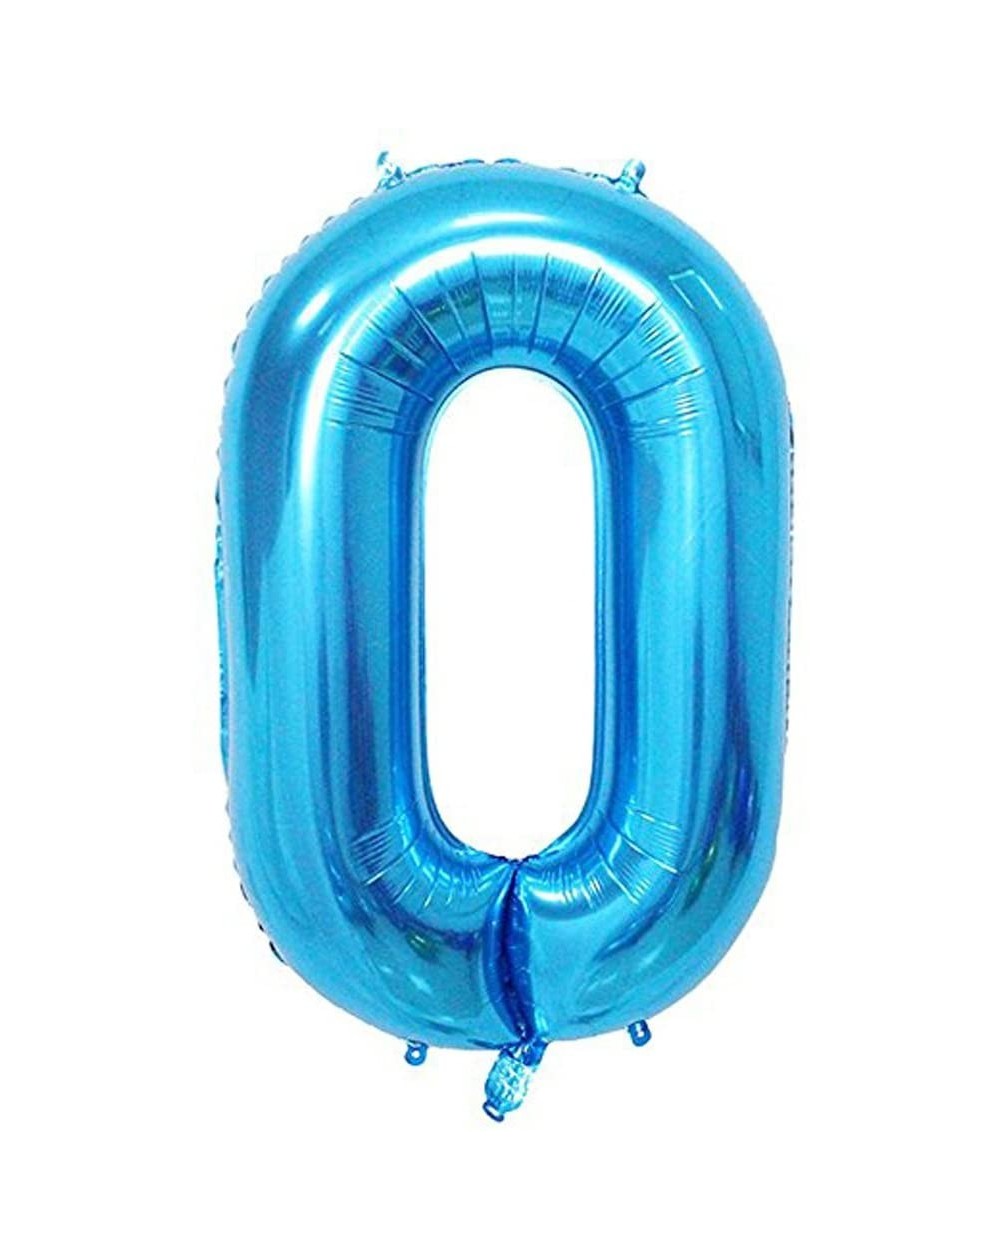 Balloons Blue Number Balloons 0- Combined into Number 1920 1930 1940 1950 1960 1970 1980 Party Decorations Balloons- 40 Inch ...